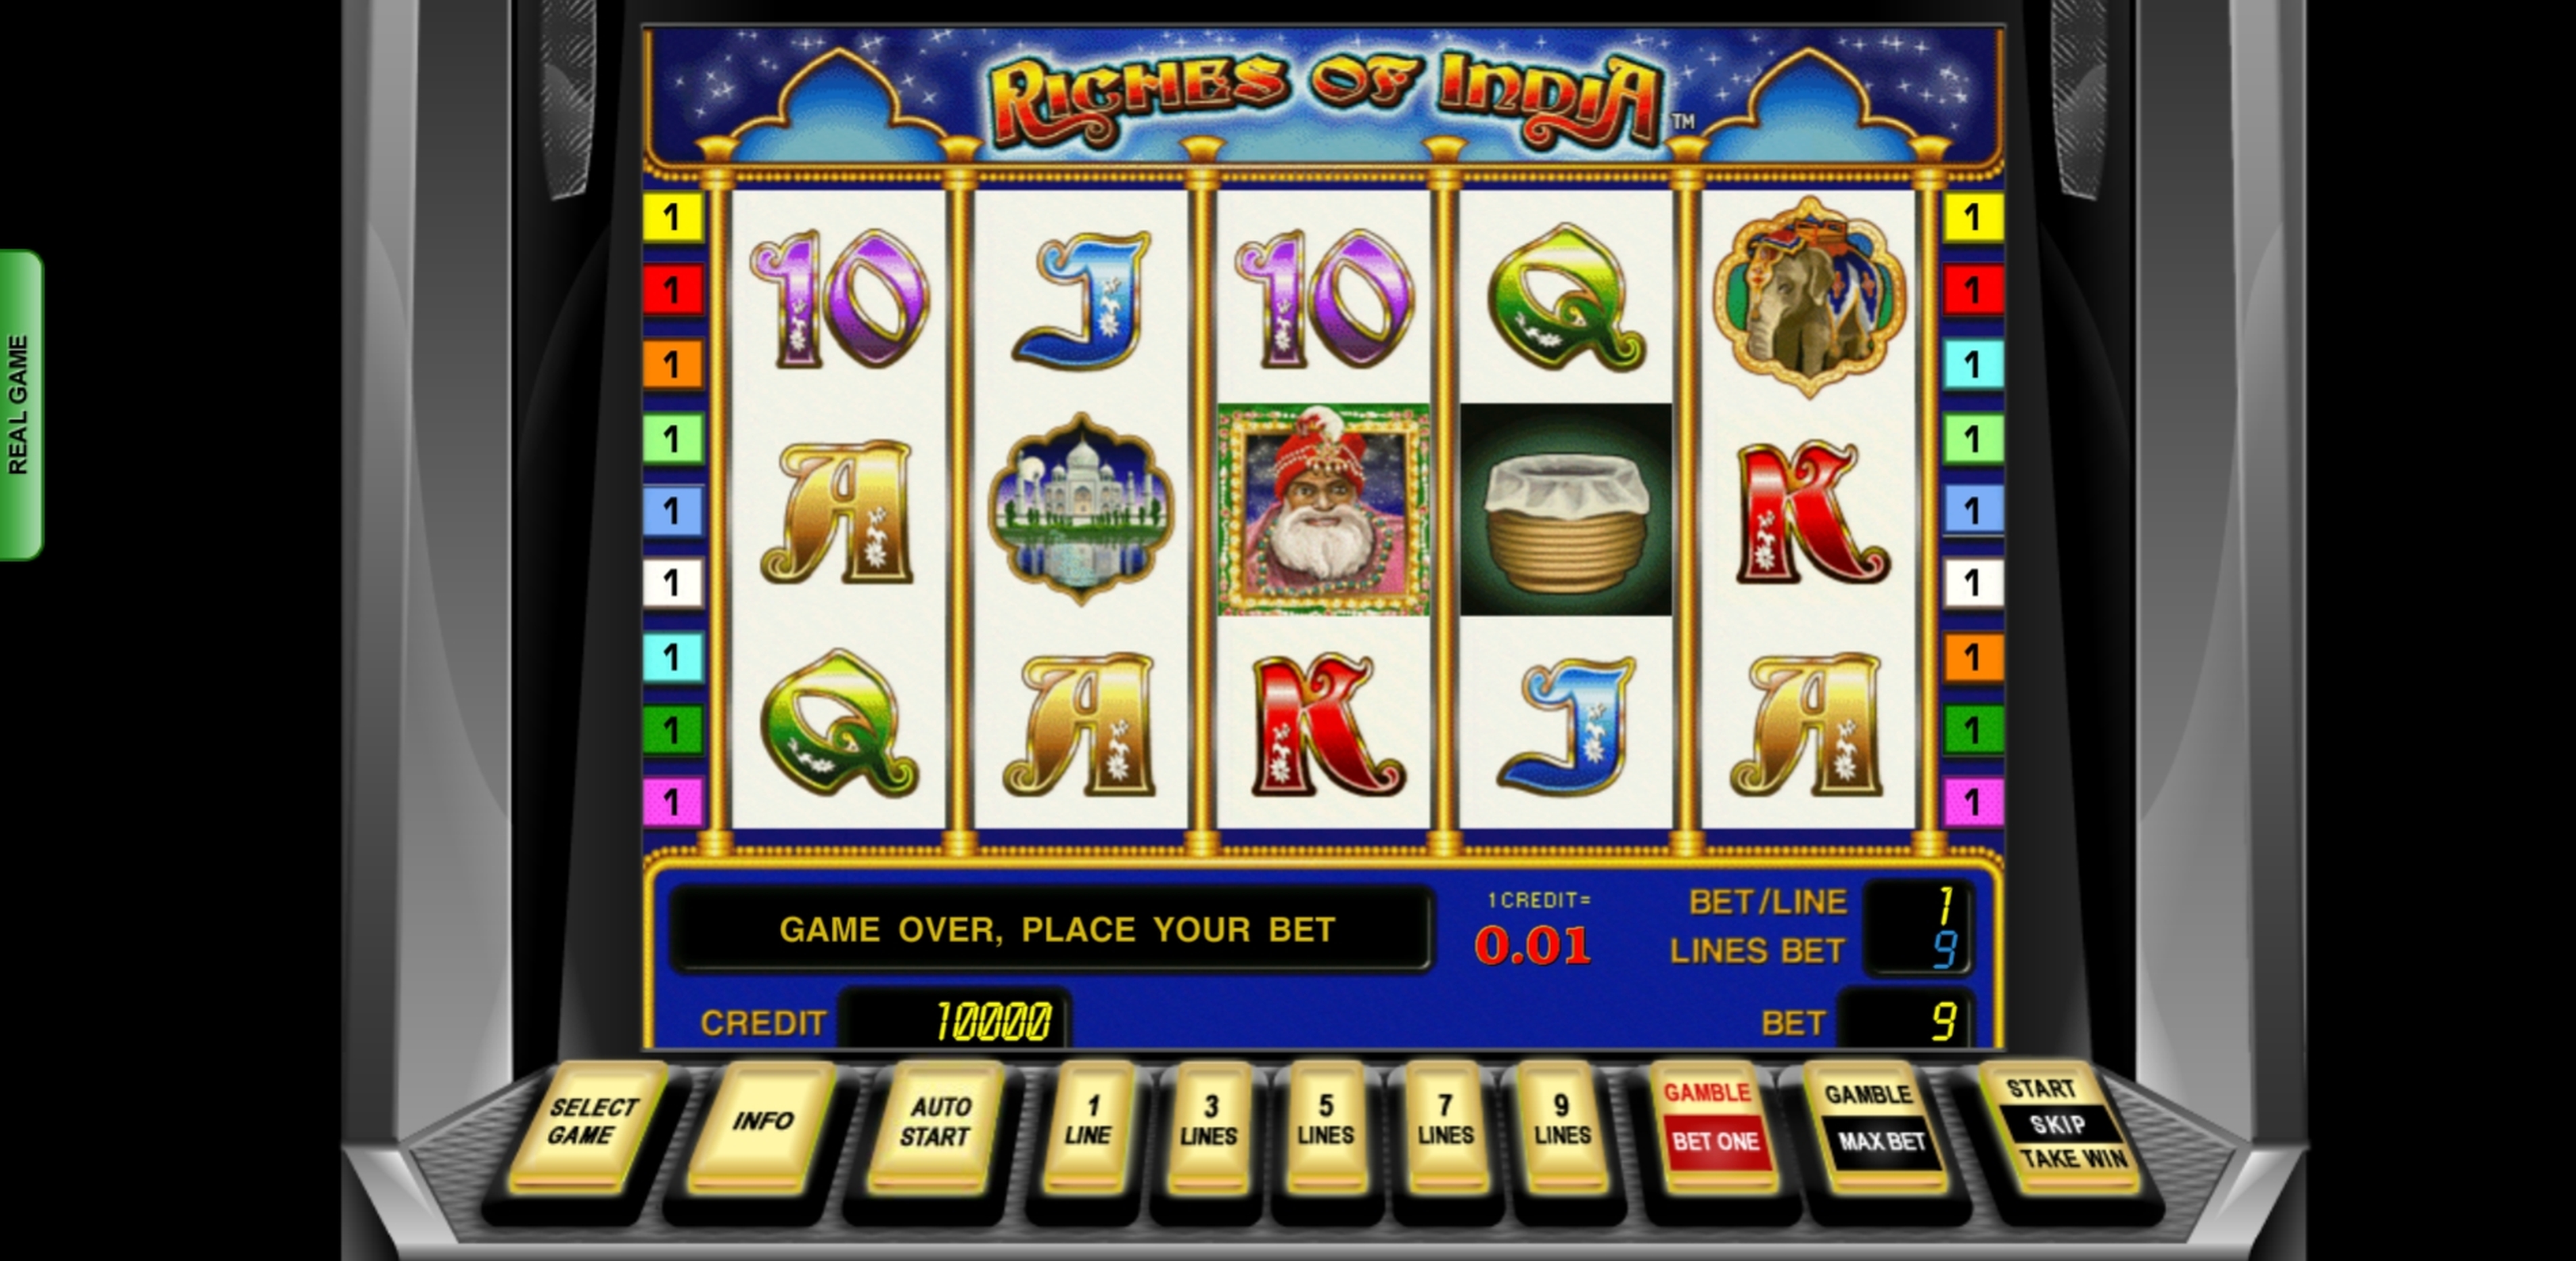 Reels in Riches of India Slot Game by Novomatic